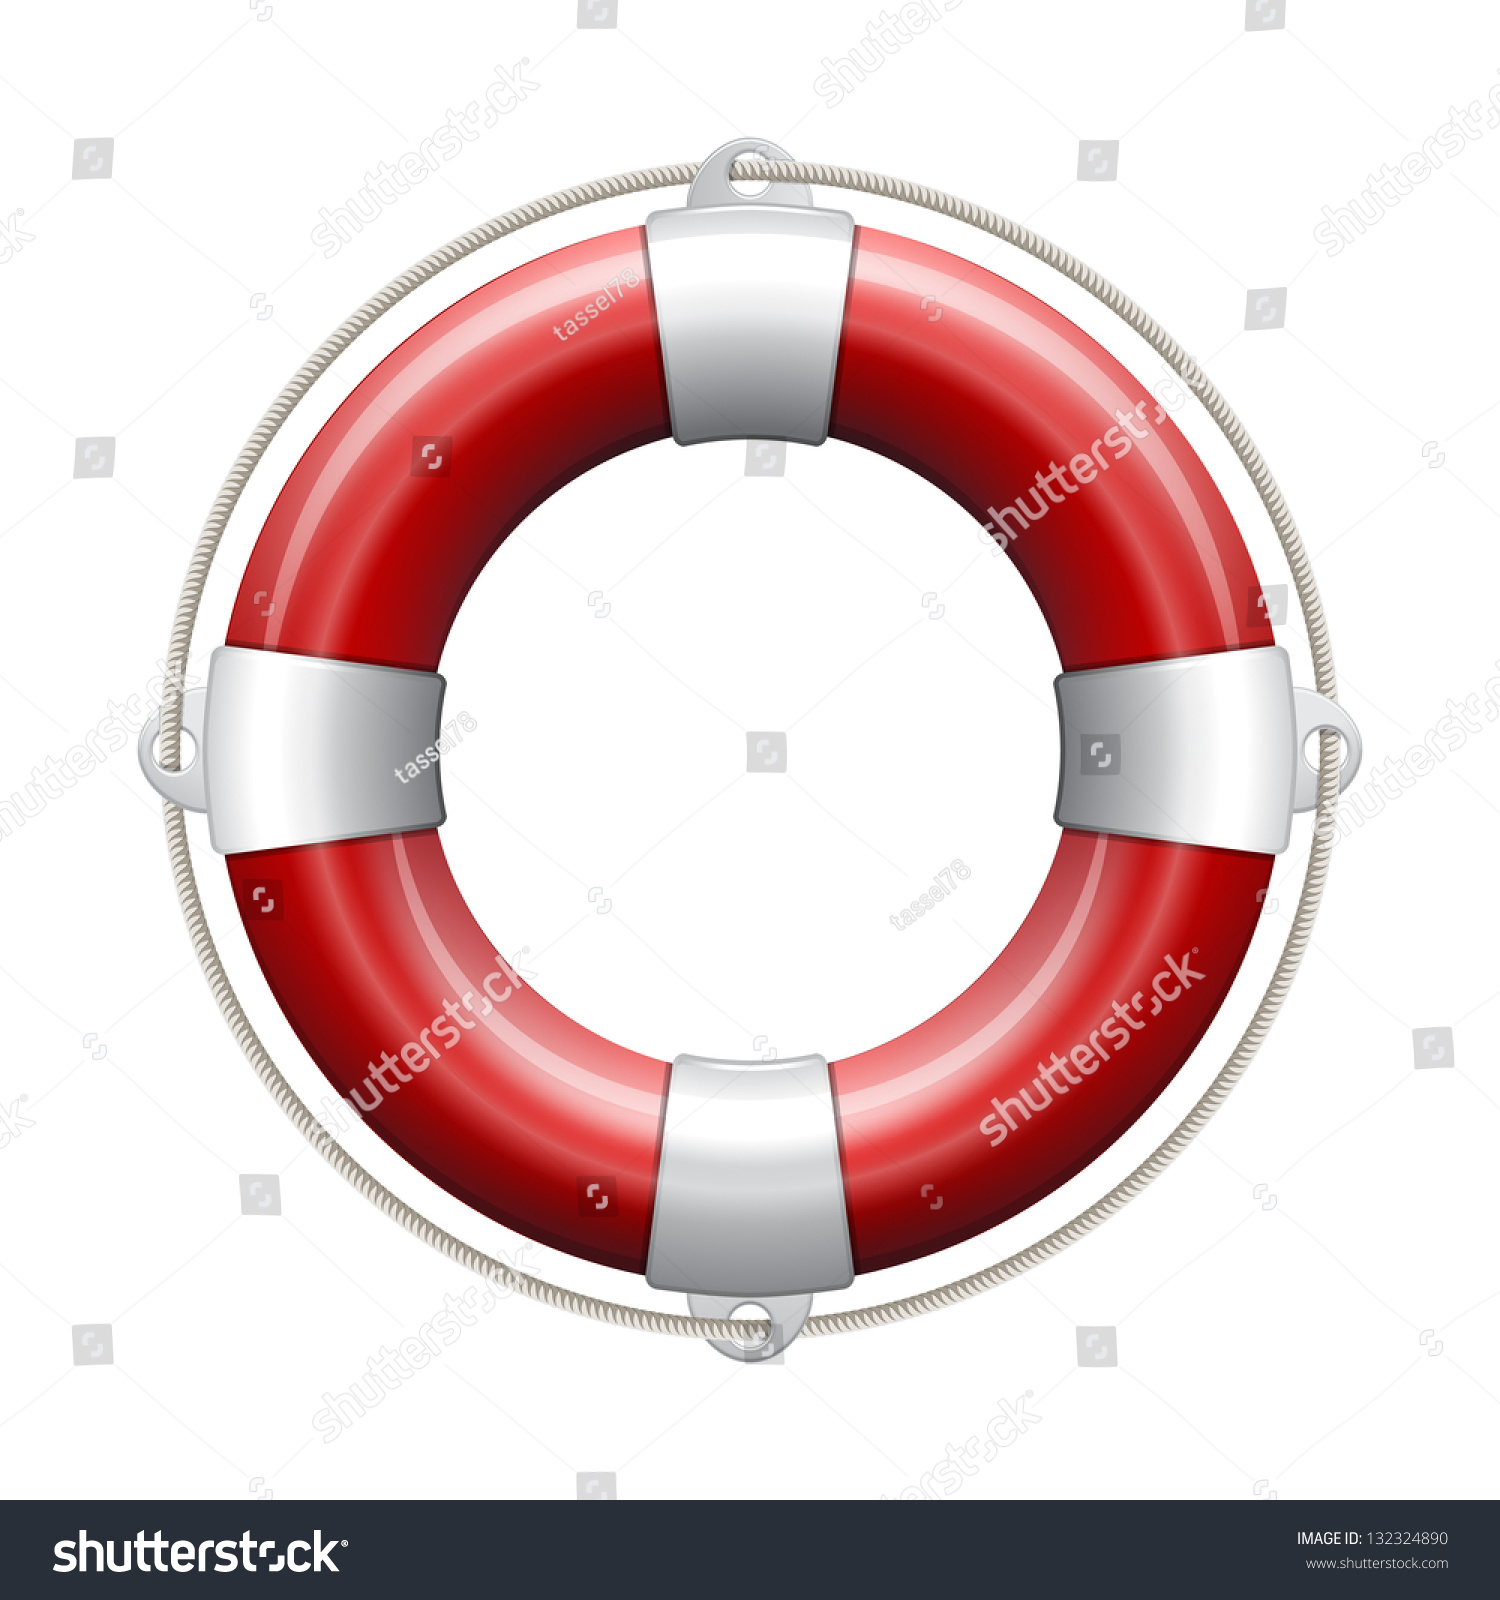 Red Life Buoy On White Background Stock Vector 132324890 - Shutterstock